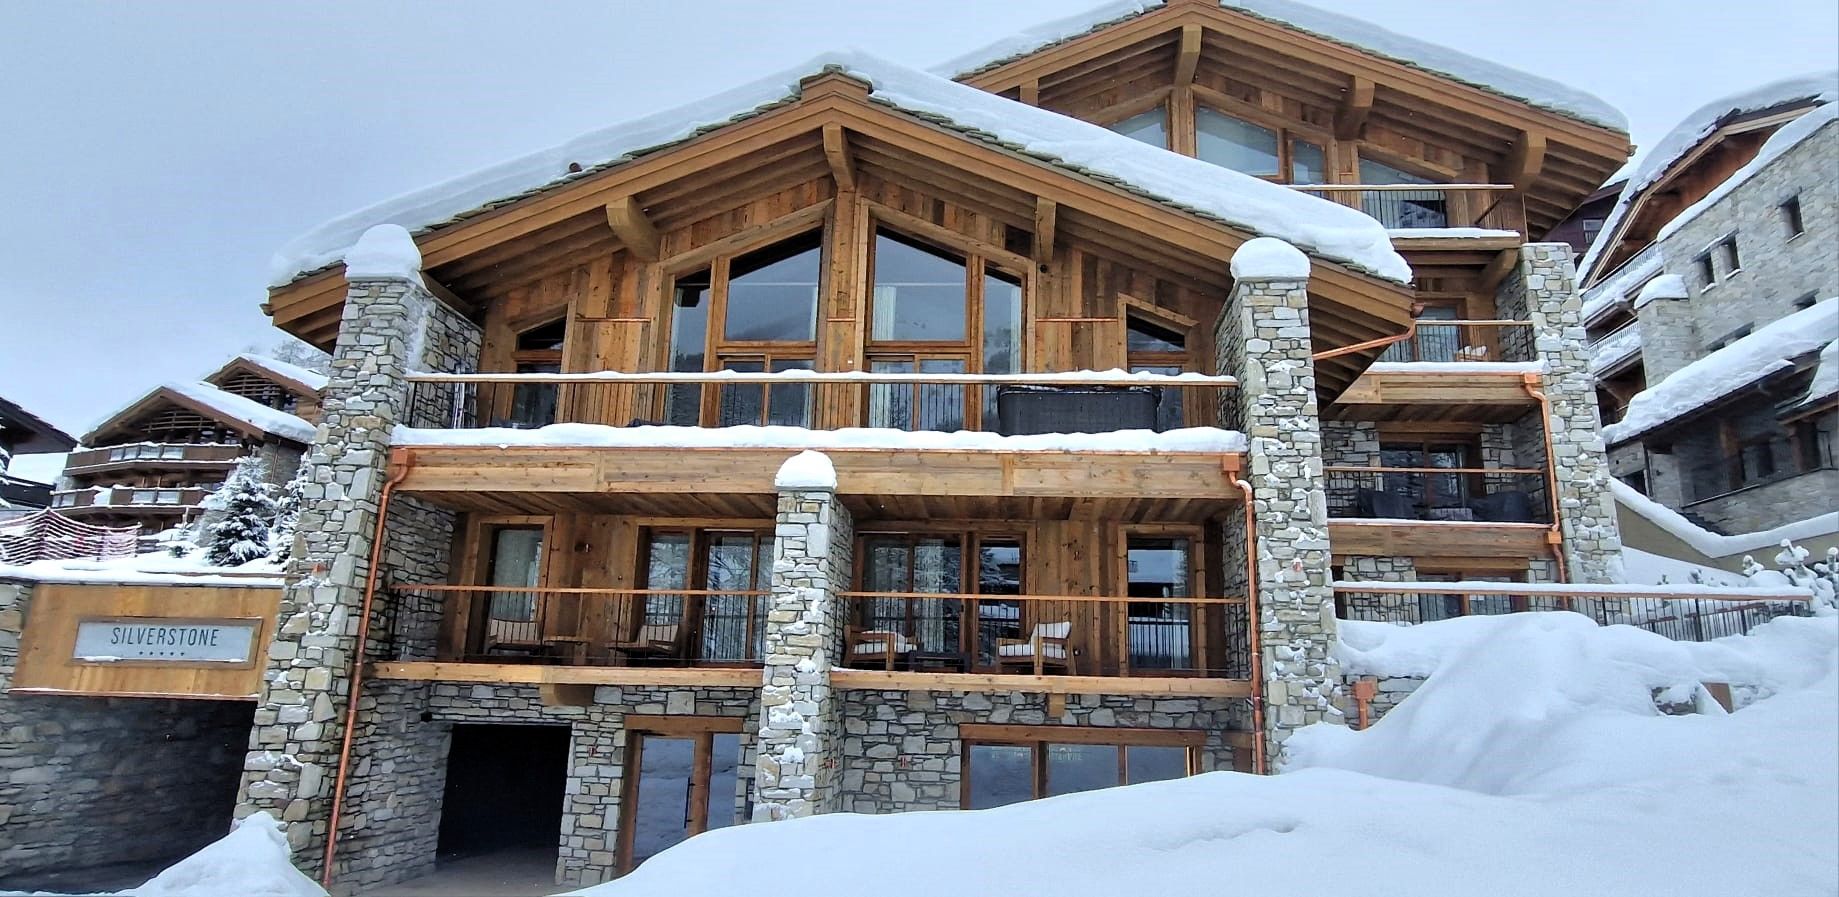 4 bed Apartment For Sale in Espace Killy, French Alps